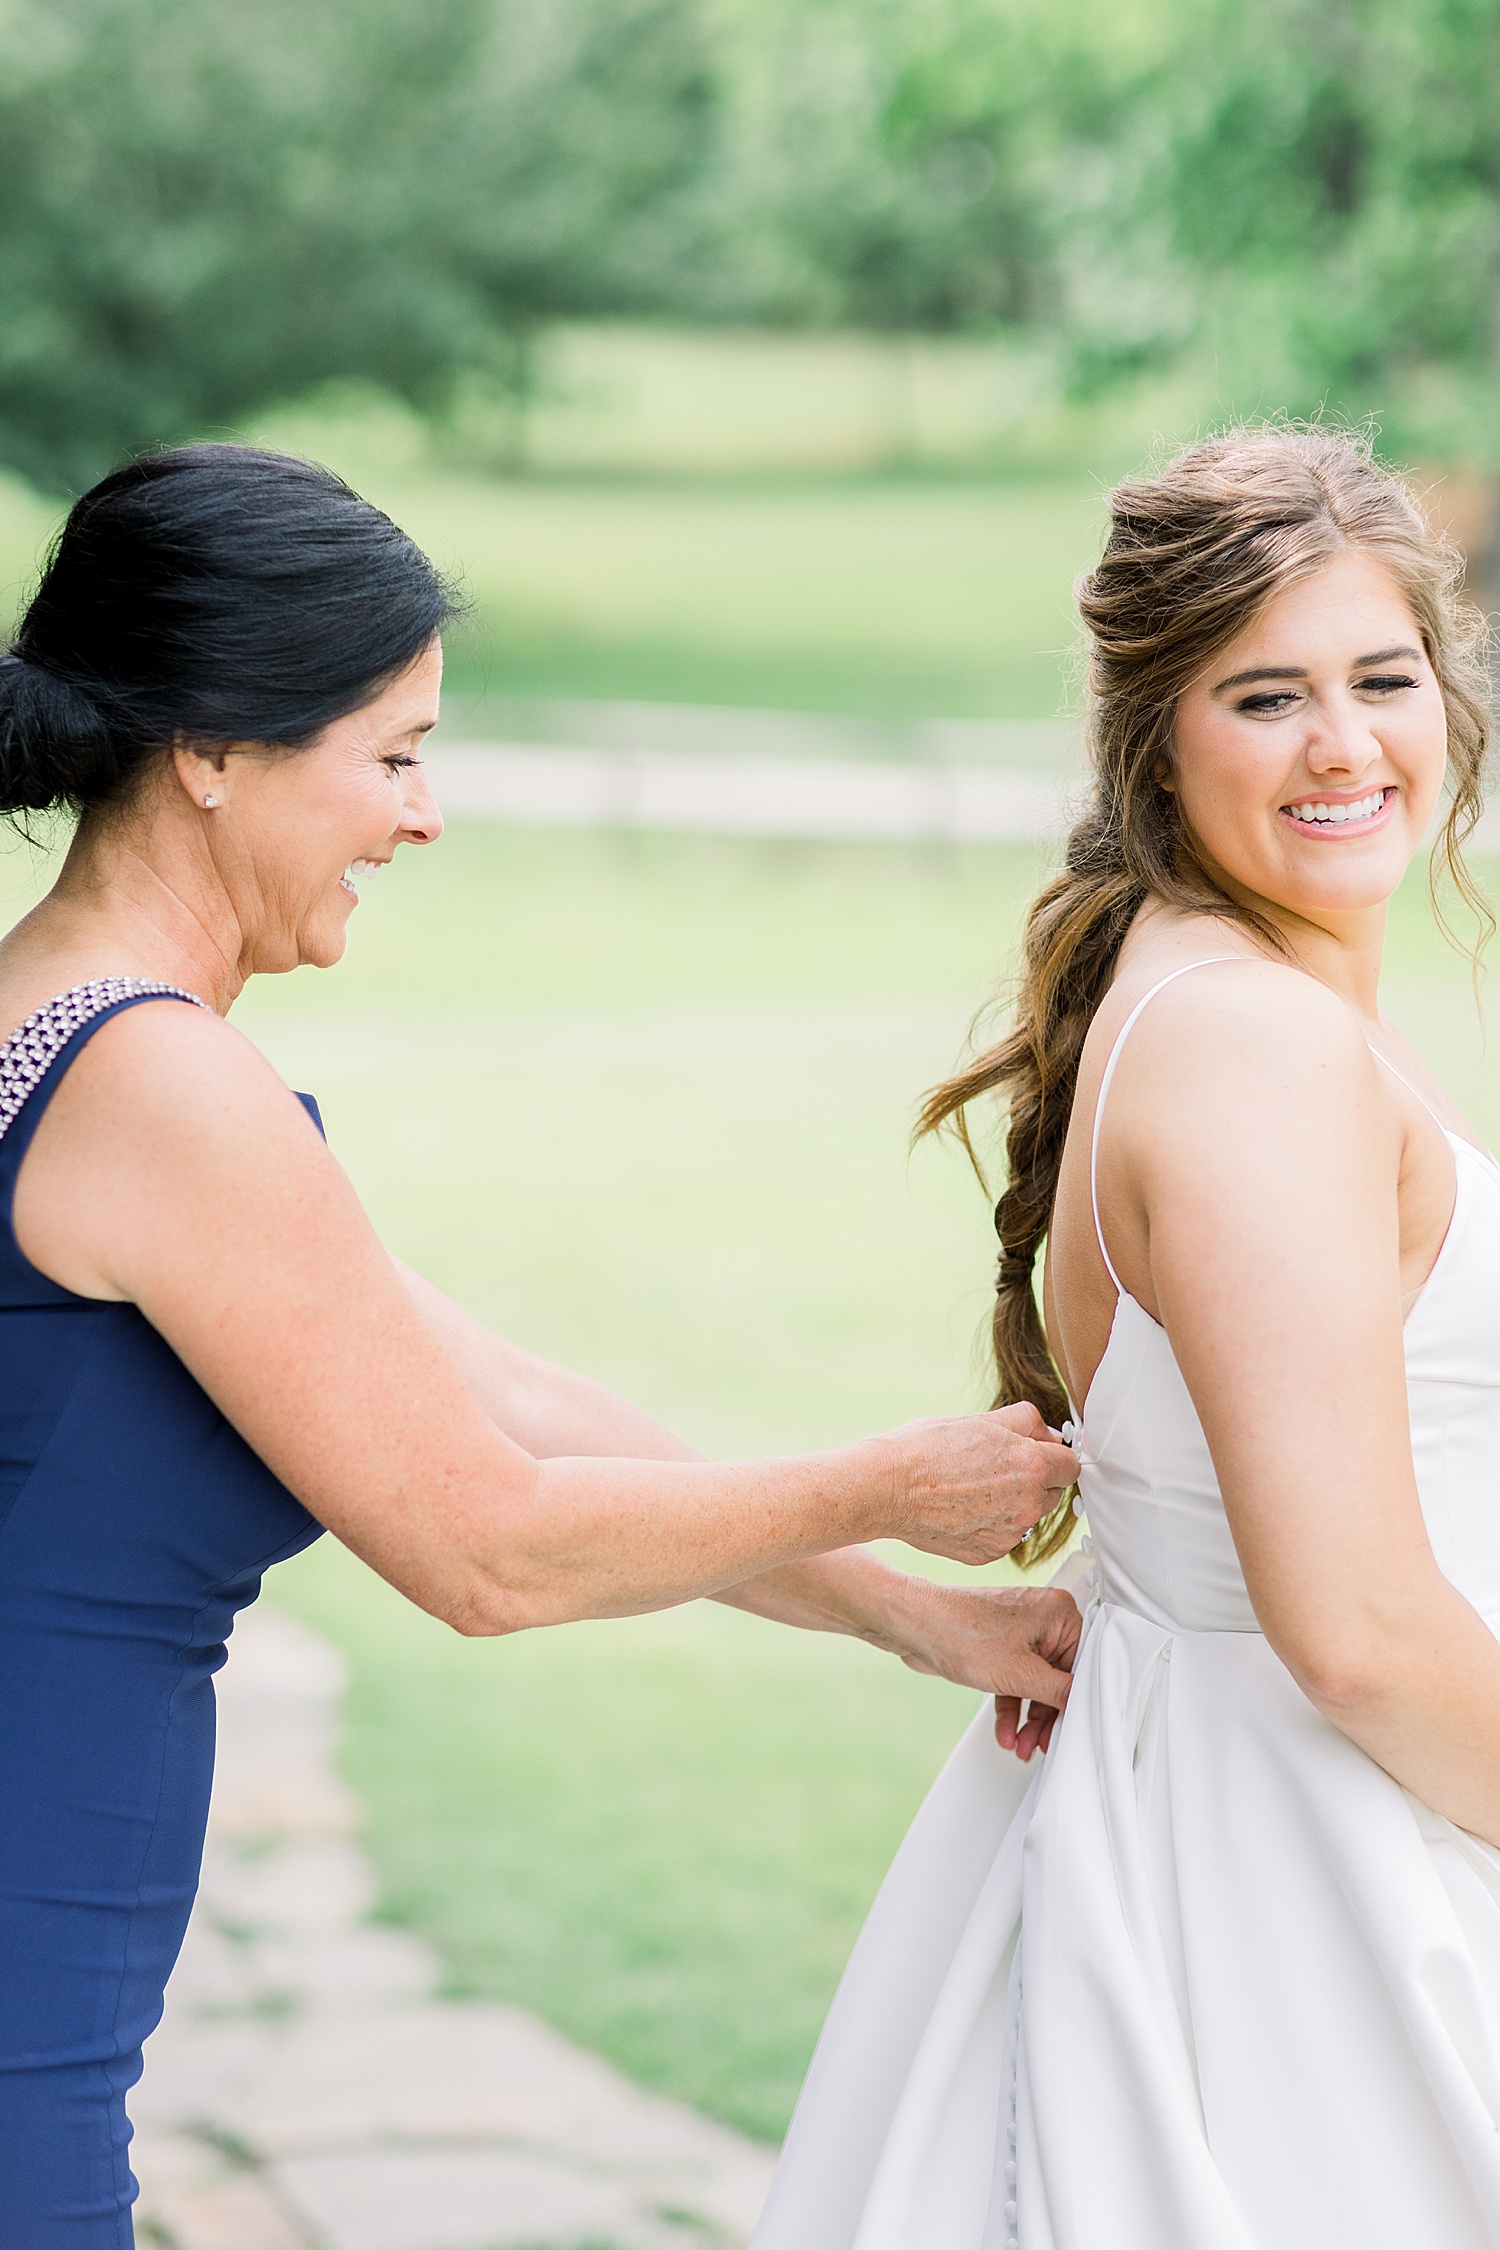 mother of the bride helps fasten back of wedding dress before ceremony